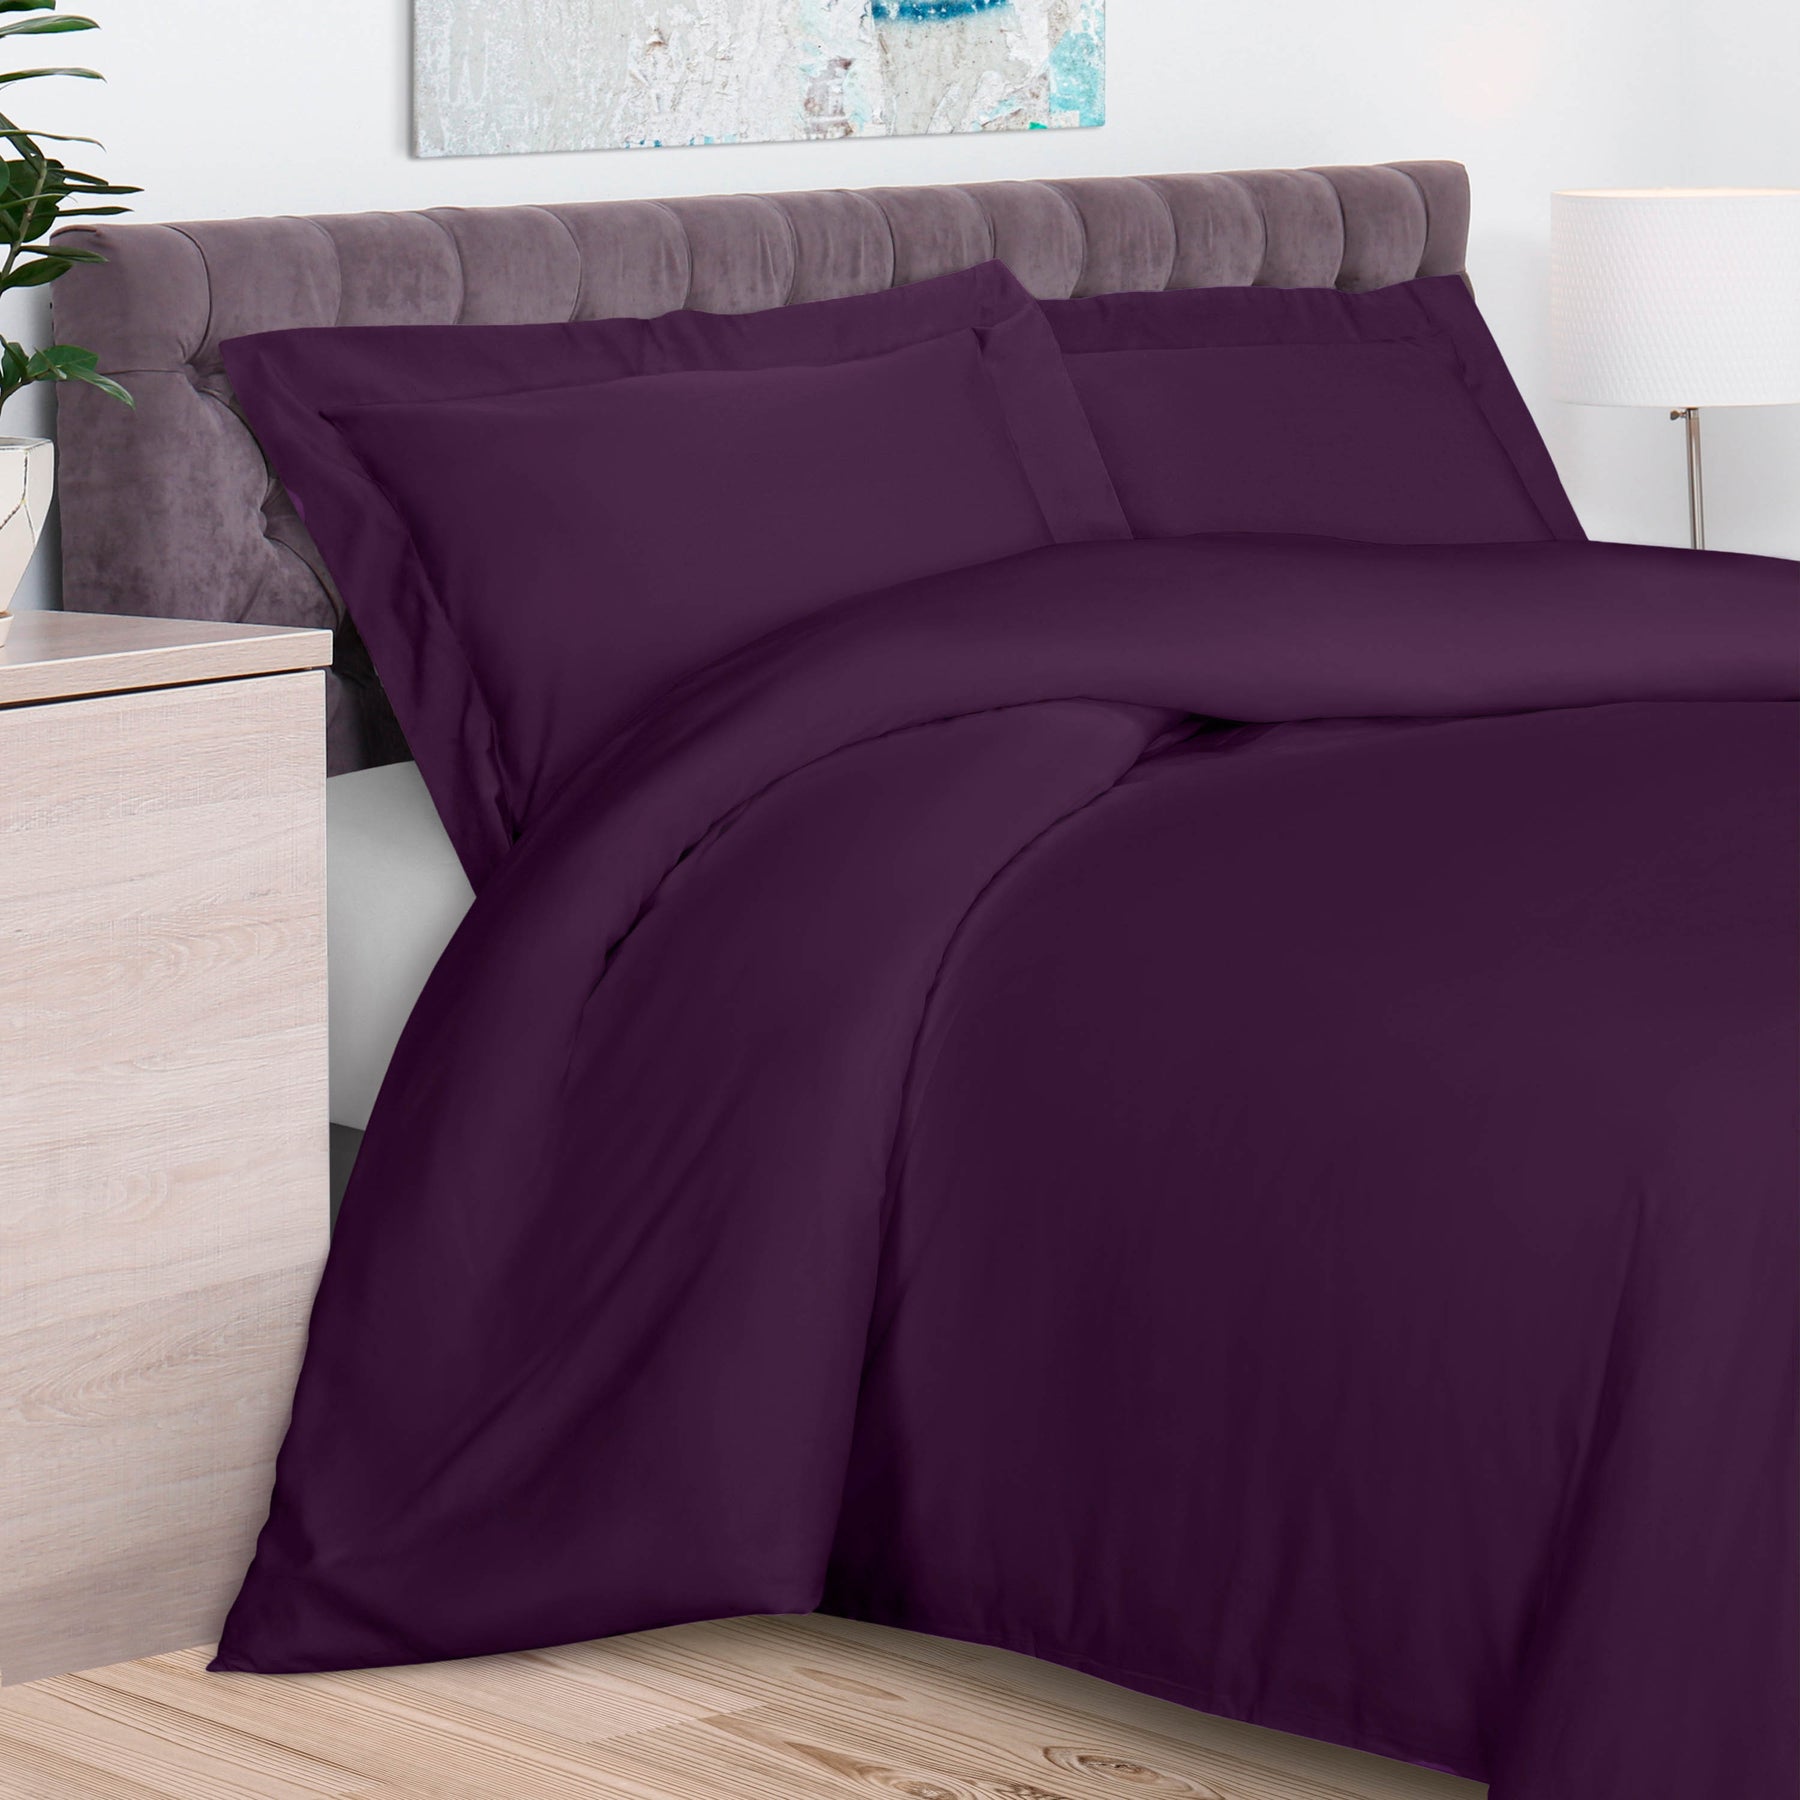 100% Rayon From Bamboo 300 Thread Count Solid Duvet Cover Set - Purple